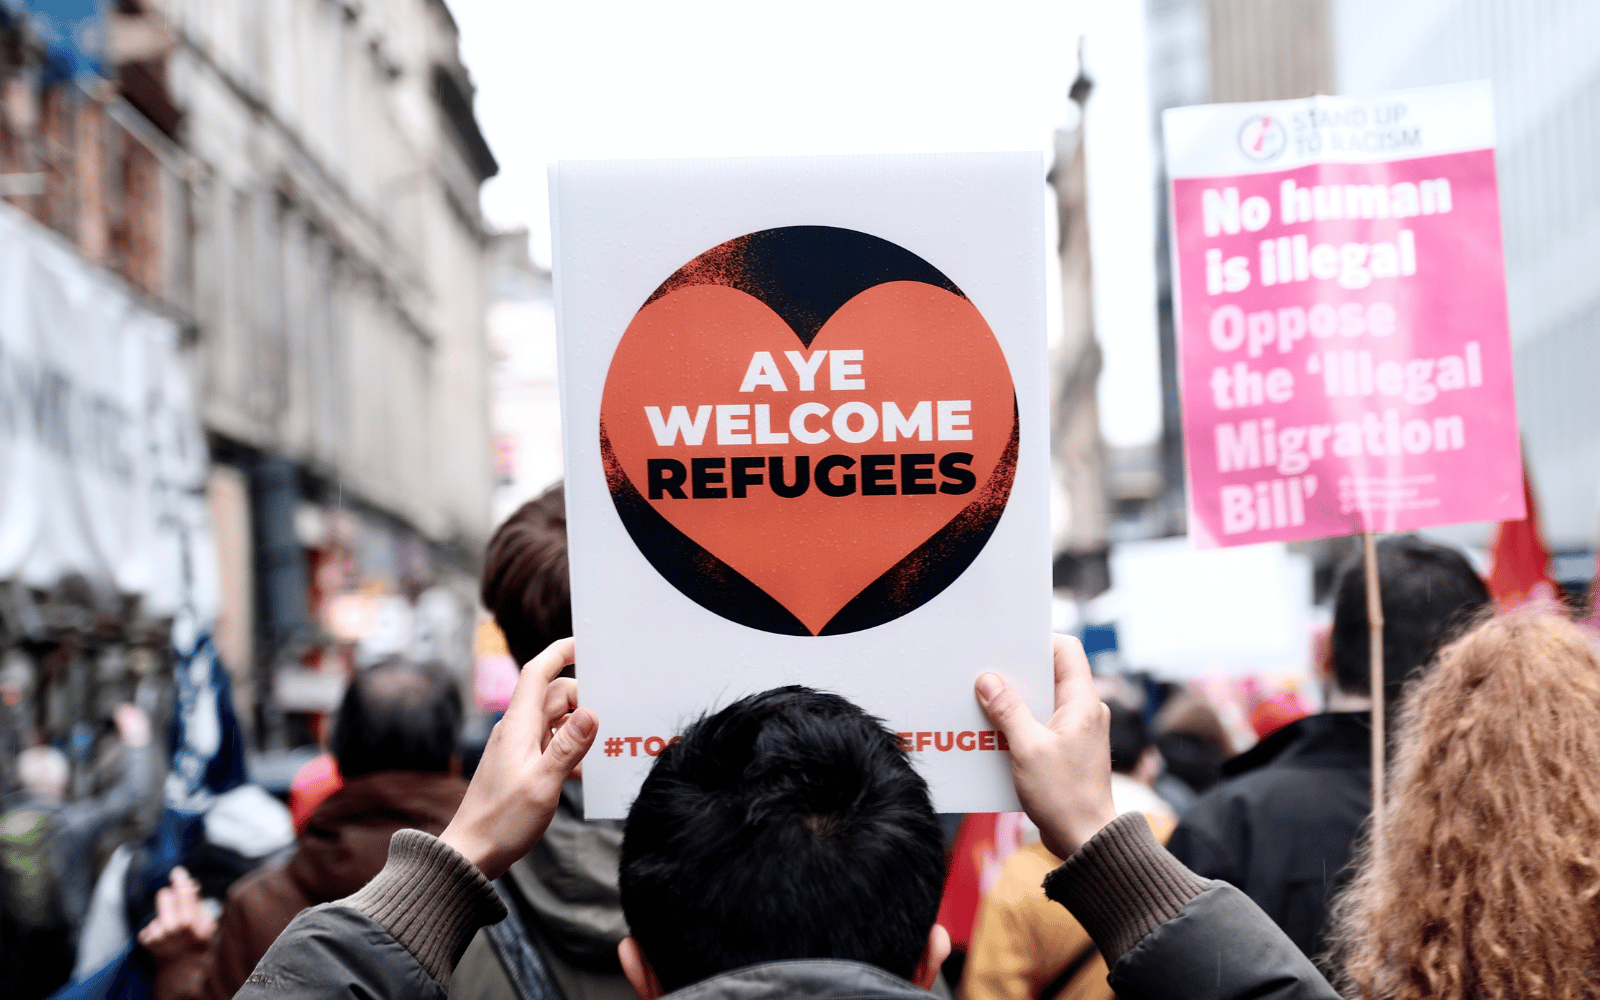 We're committed to standing up for refugee rights